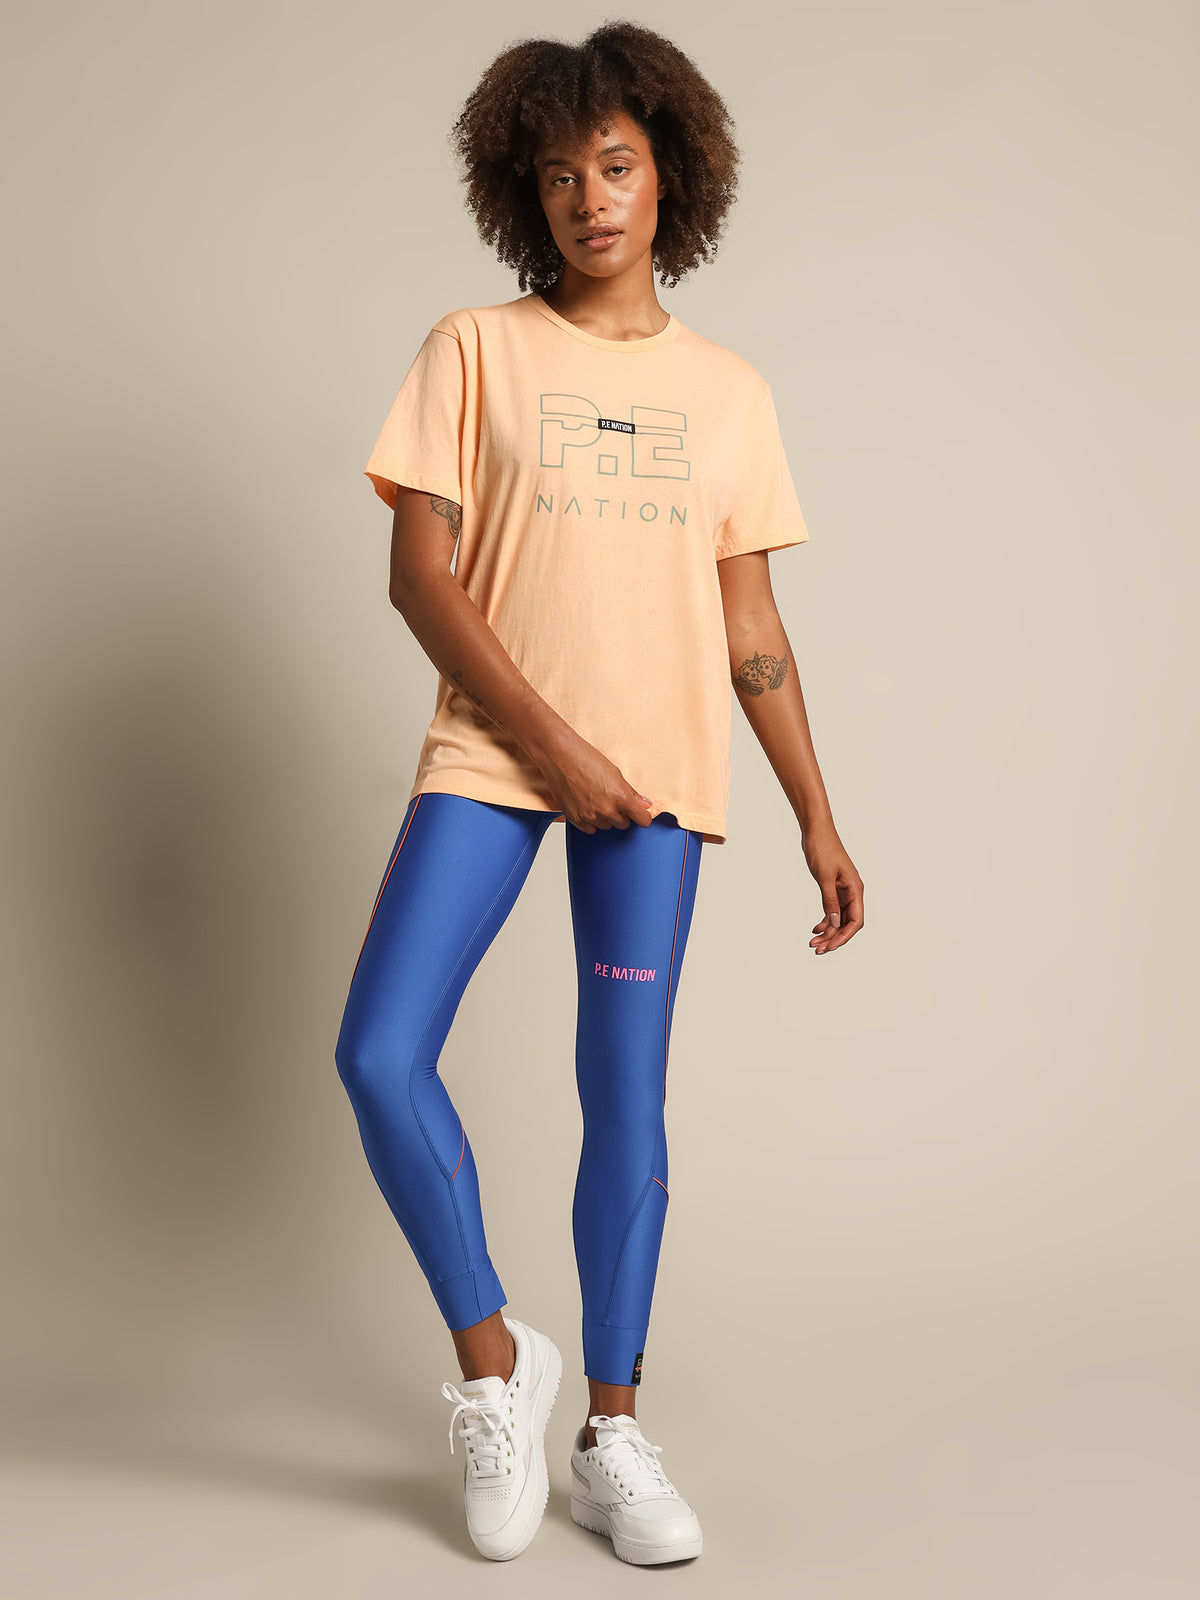 Victory Legging in Electric Blue